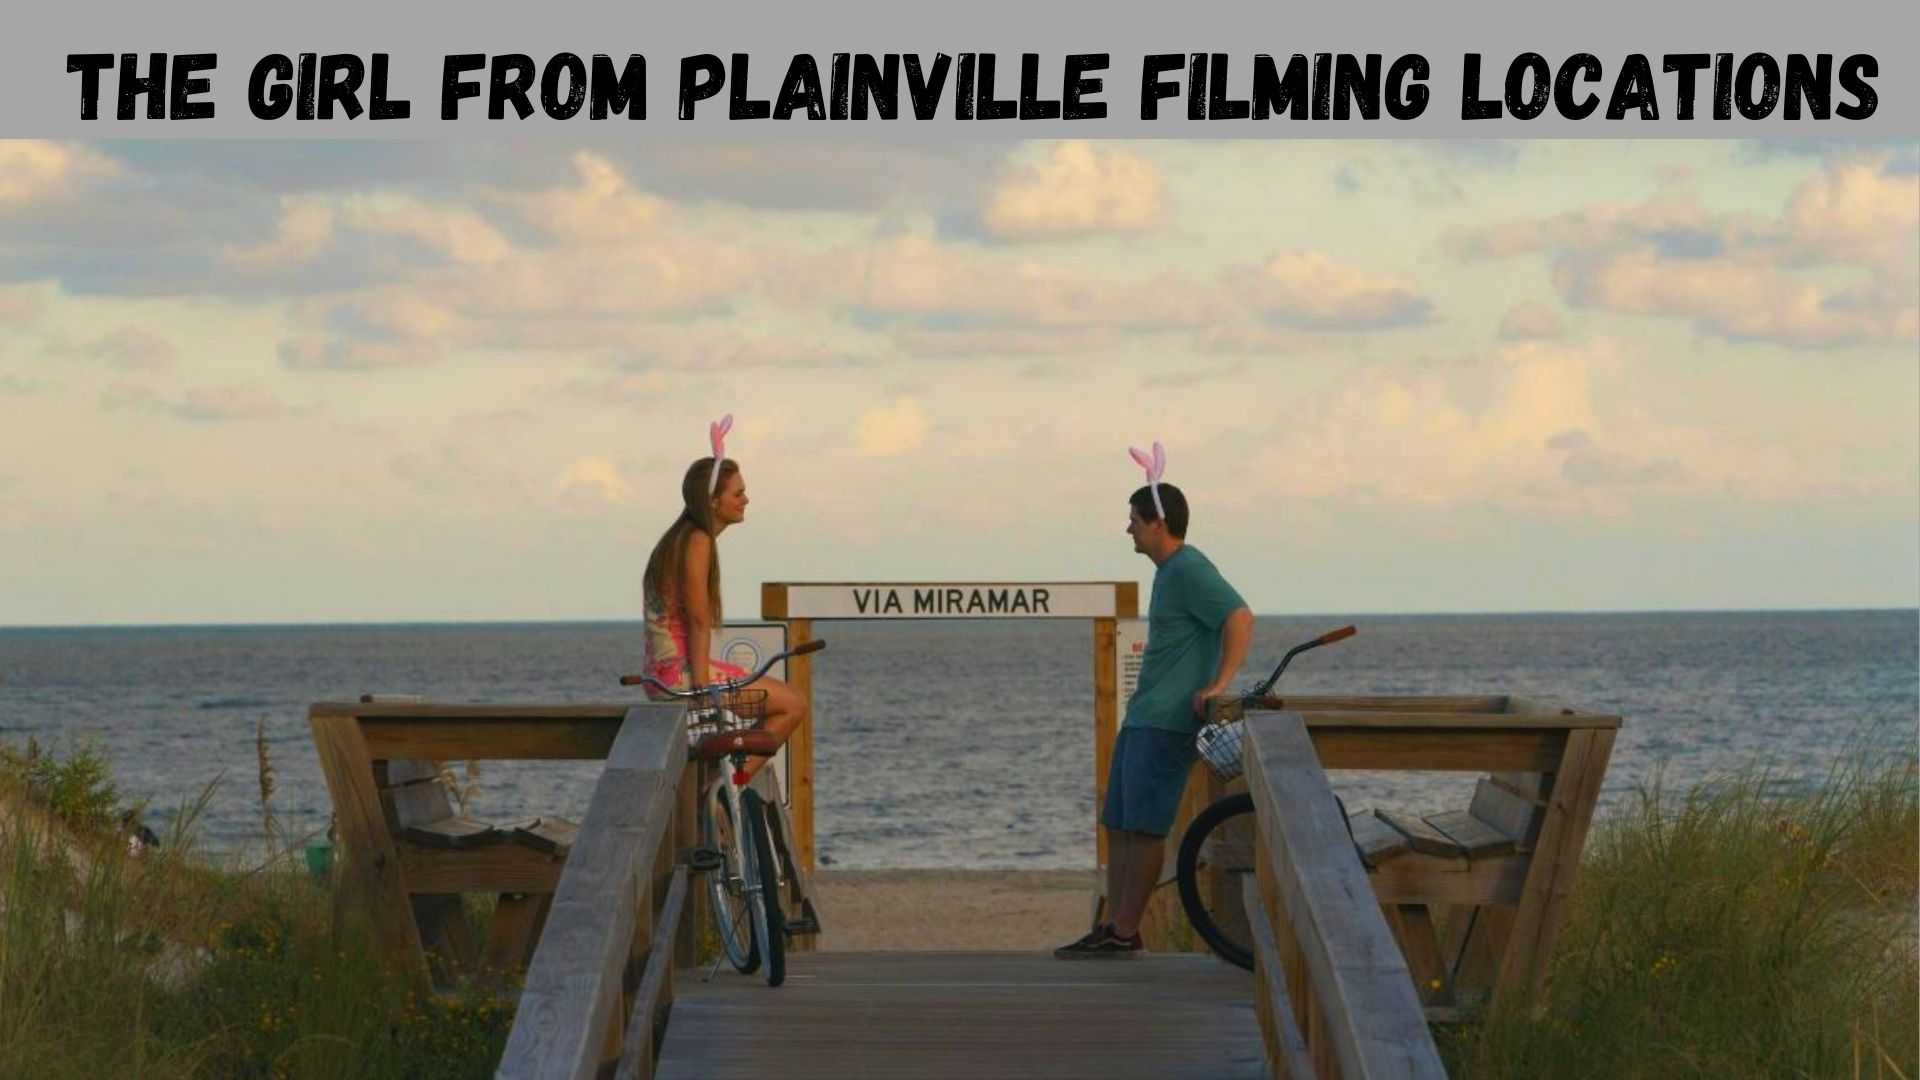 The Girl from Plainville Filming Locations wallpaper and images